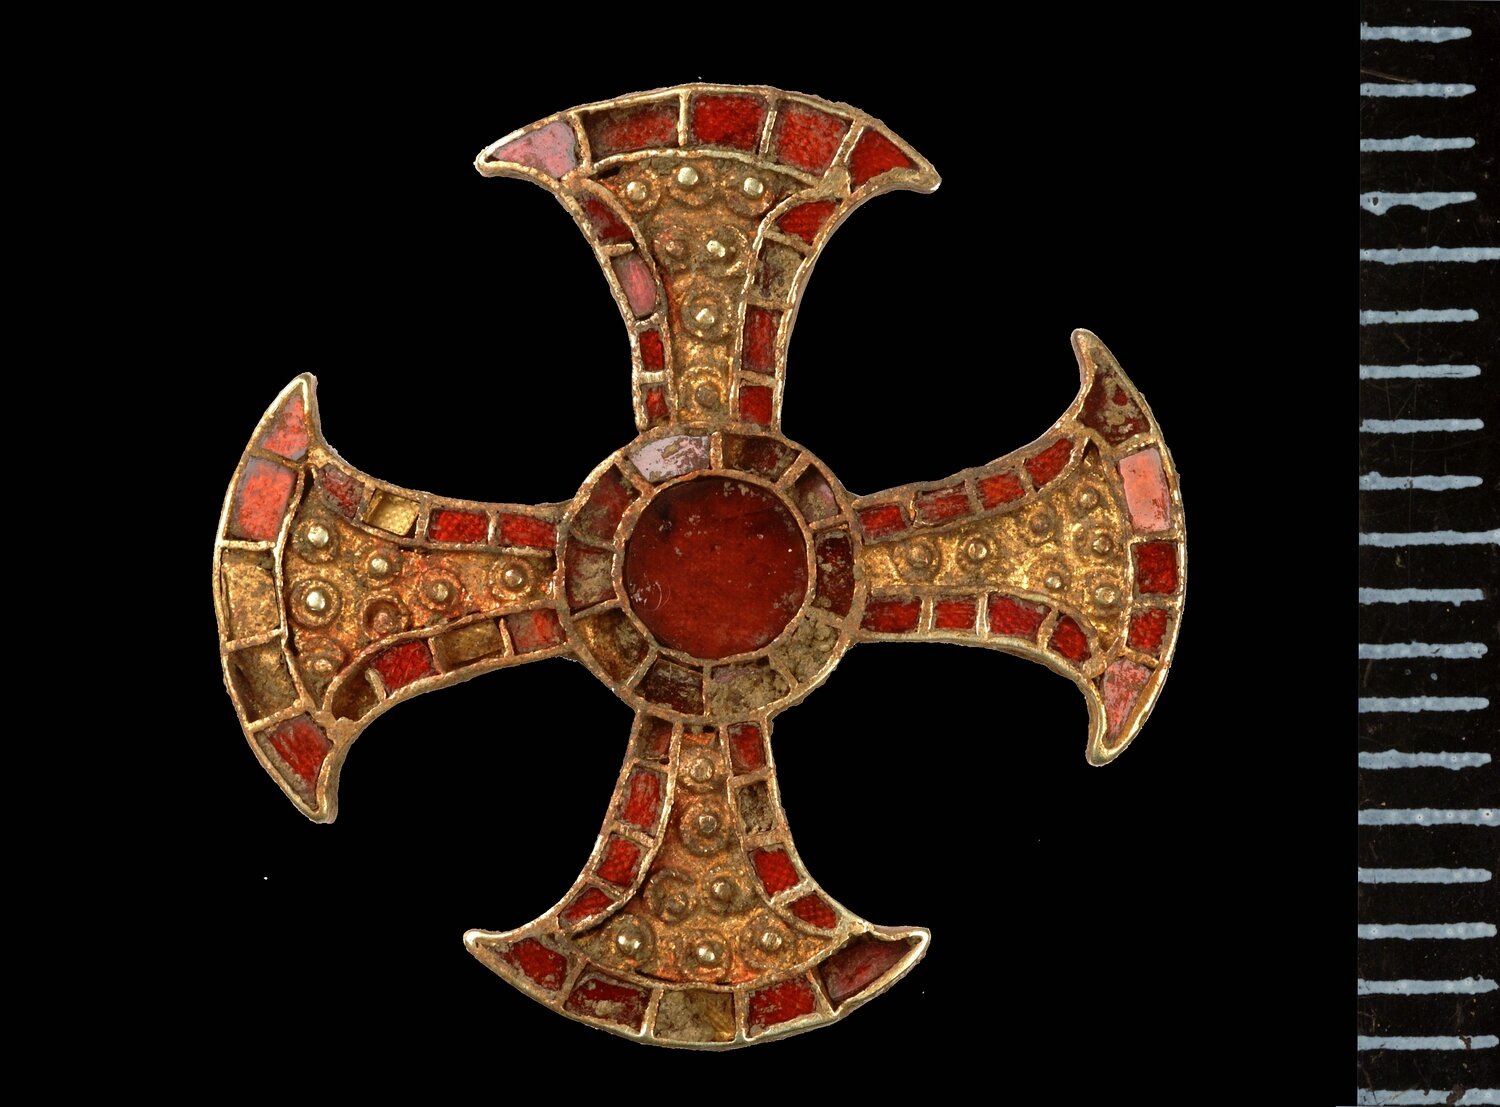 Anglo-Saxon cross buried for 1,000 years seen in stunning detail for the  first time